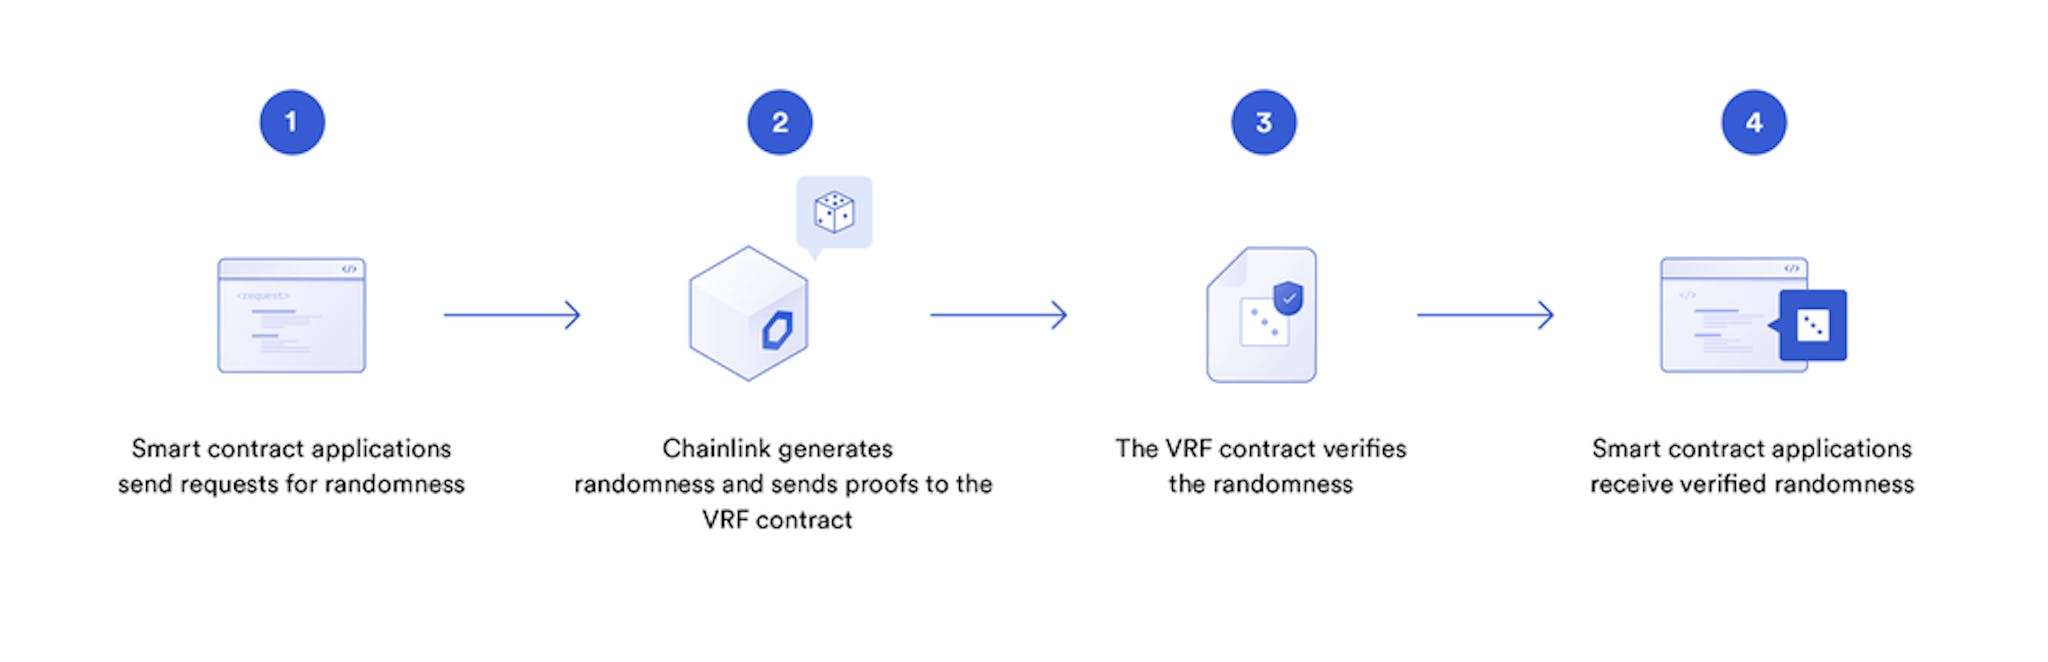 How VRF works: Smart contracts request randomness from Chainlink oracles which generate and verify results before returning data back to the smart contract.